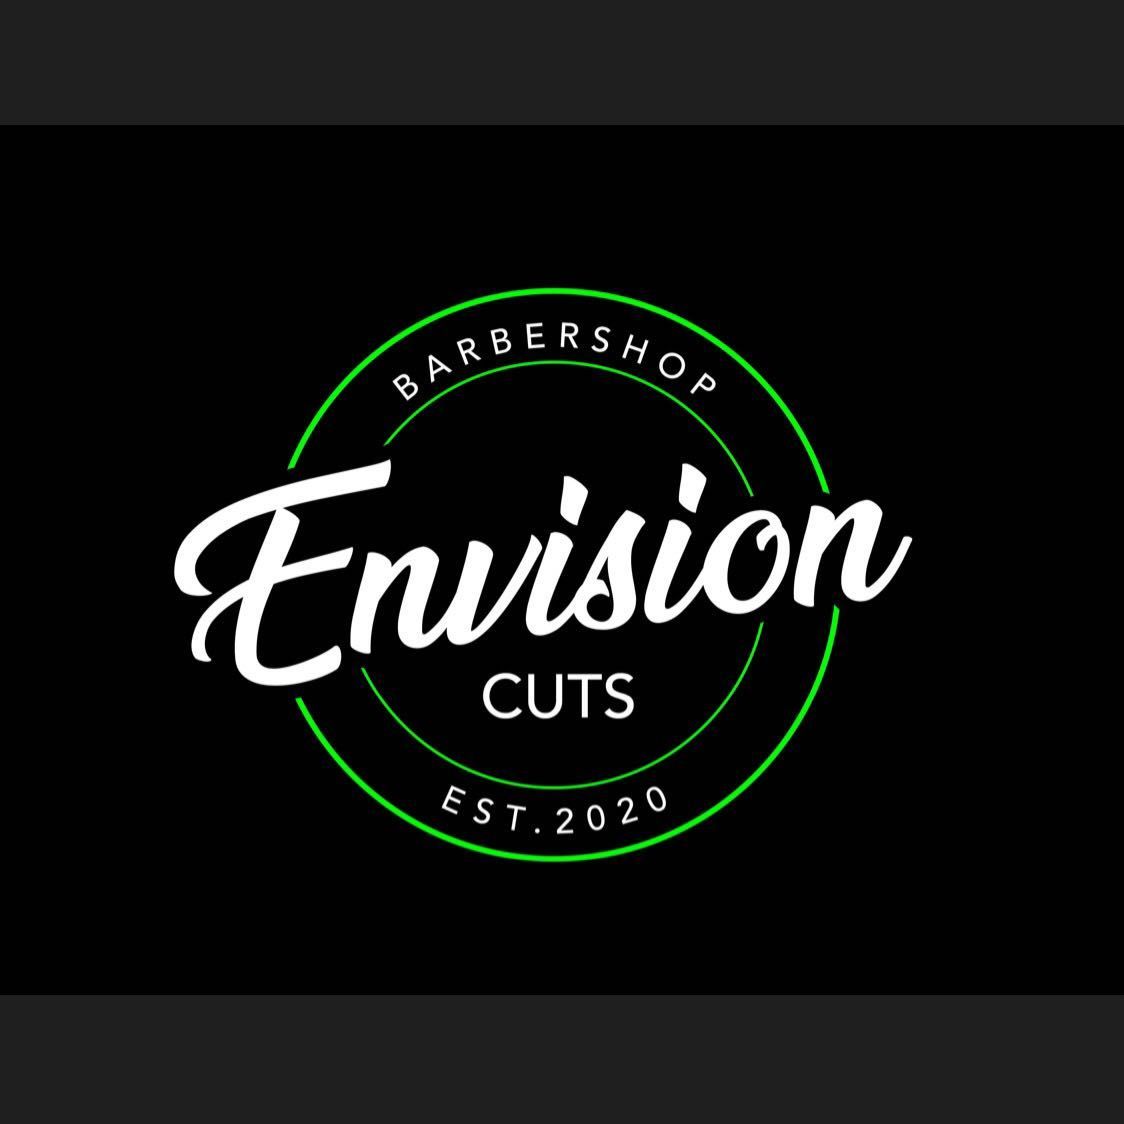 Envision cuts Barbershop, 457 Rantoul St, Beverly, 01915